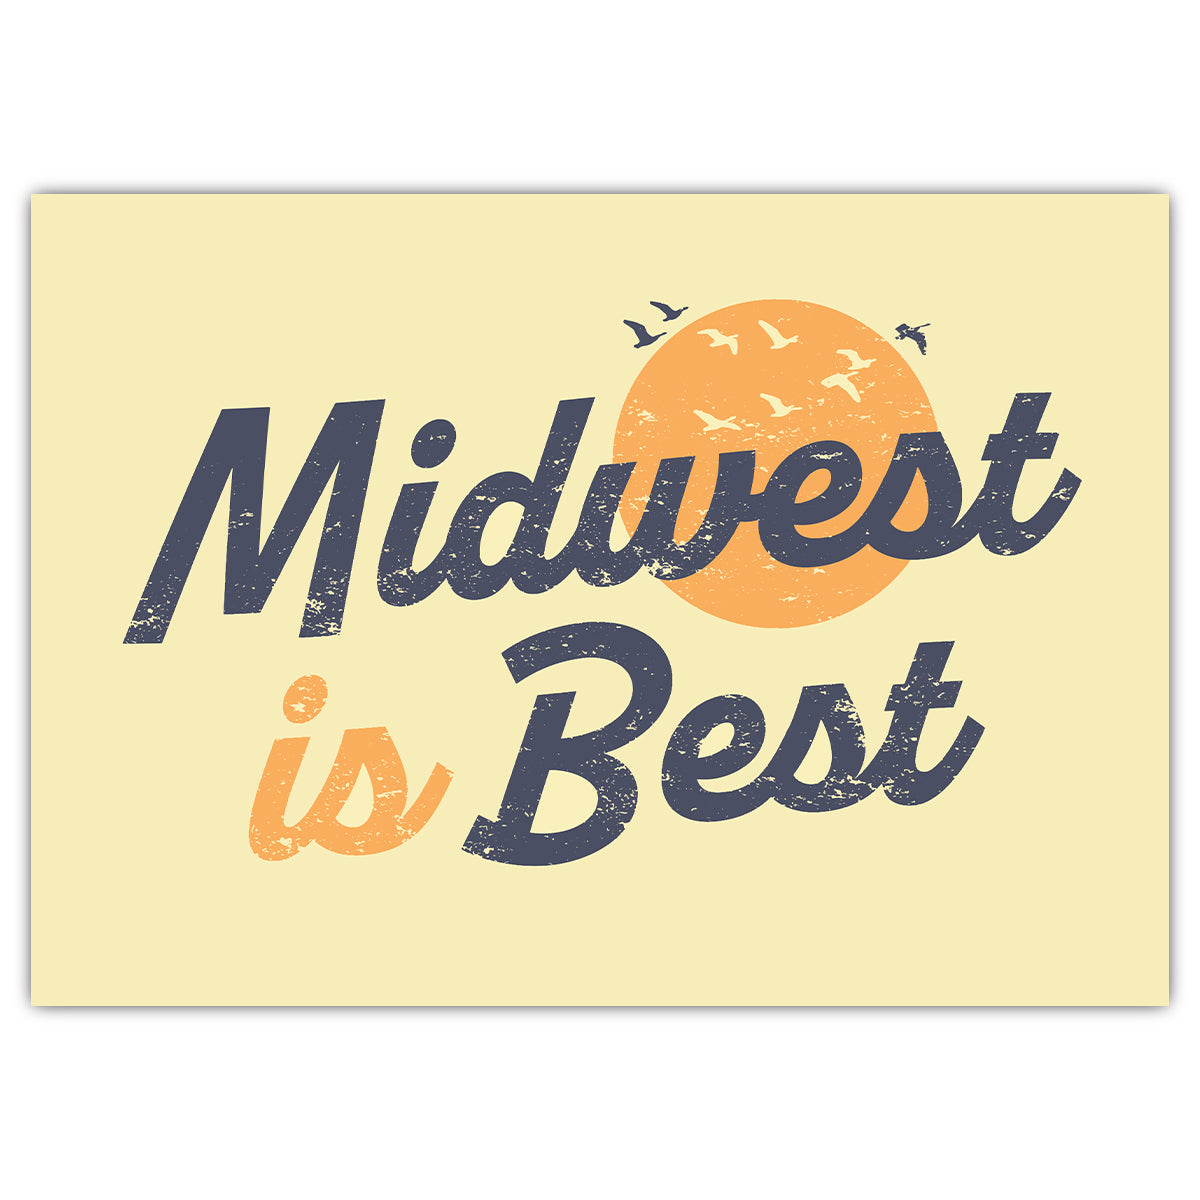 Midwest is Best Greeting Card - Bozz Prints